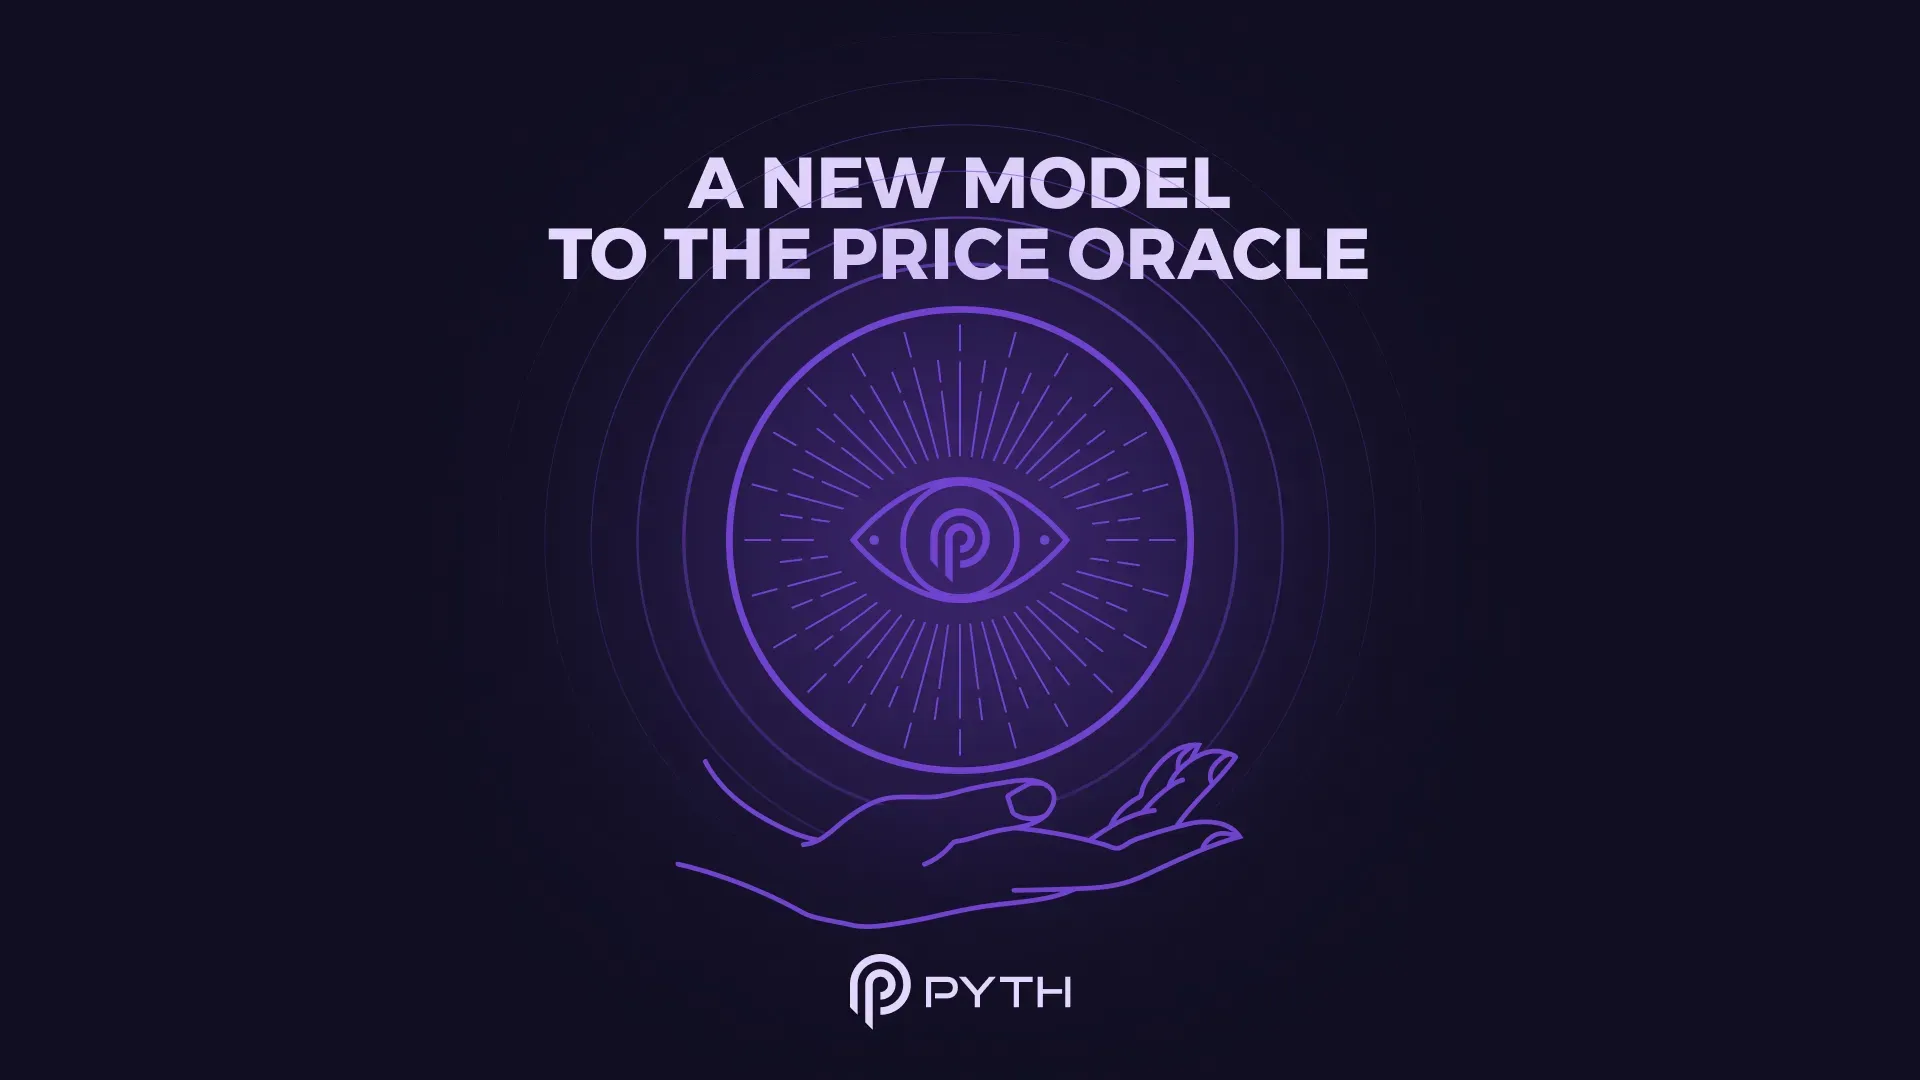 Pull, Don't Push: A New Price Oracle Architecture